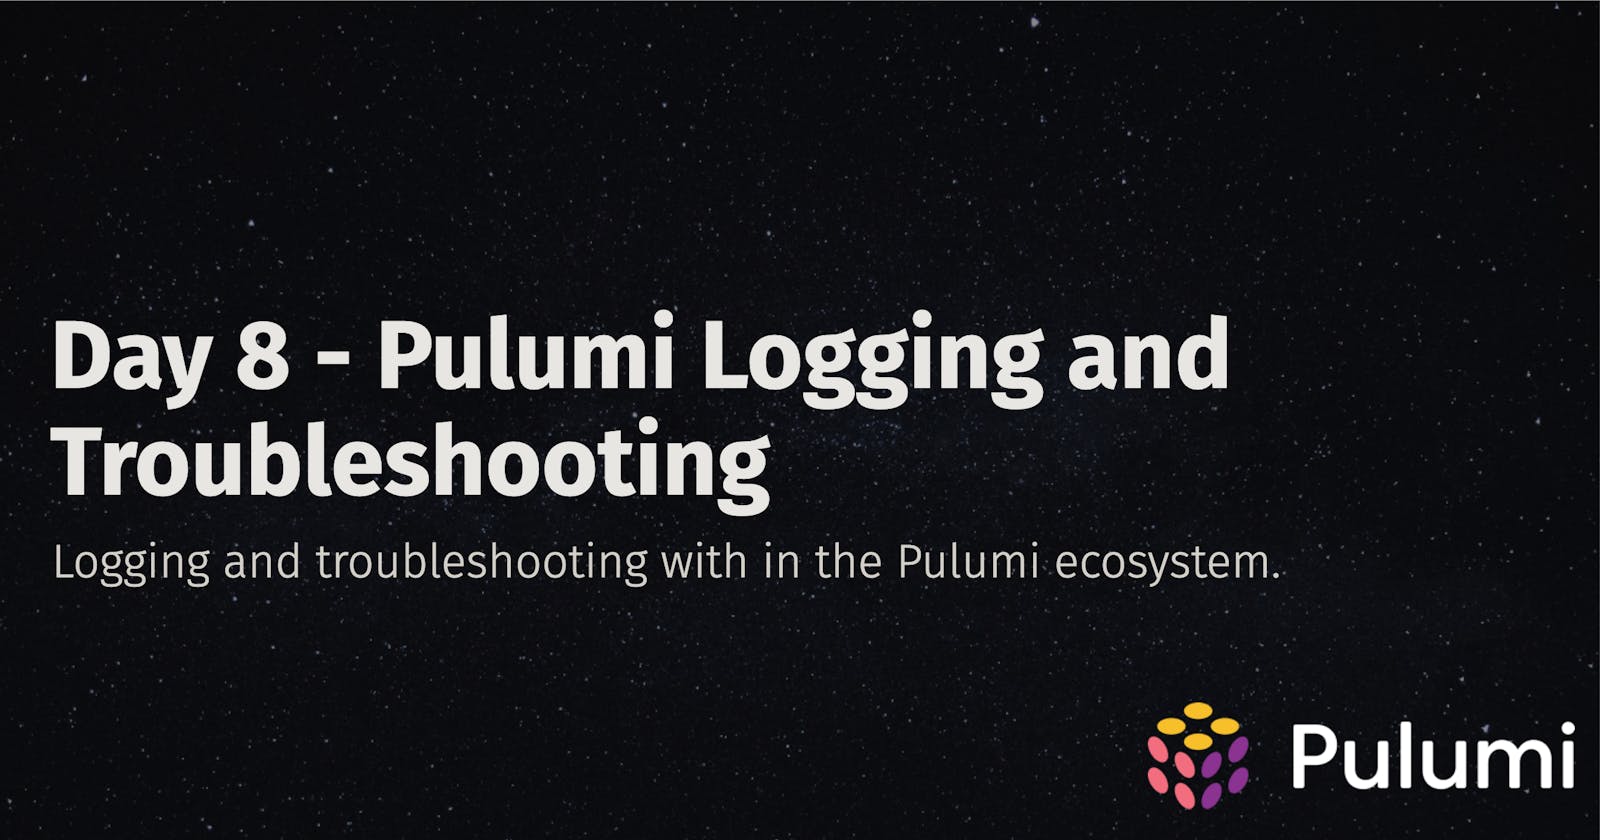 Day 8 - Pulumi Logging and Troubleshooting